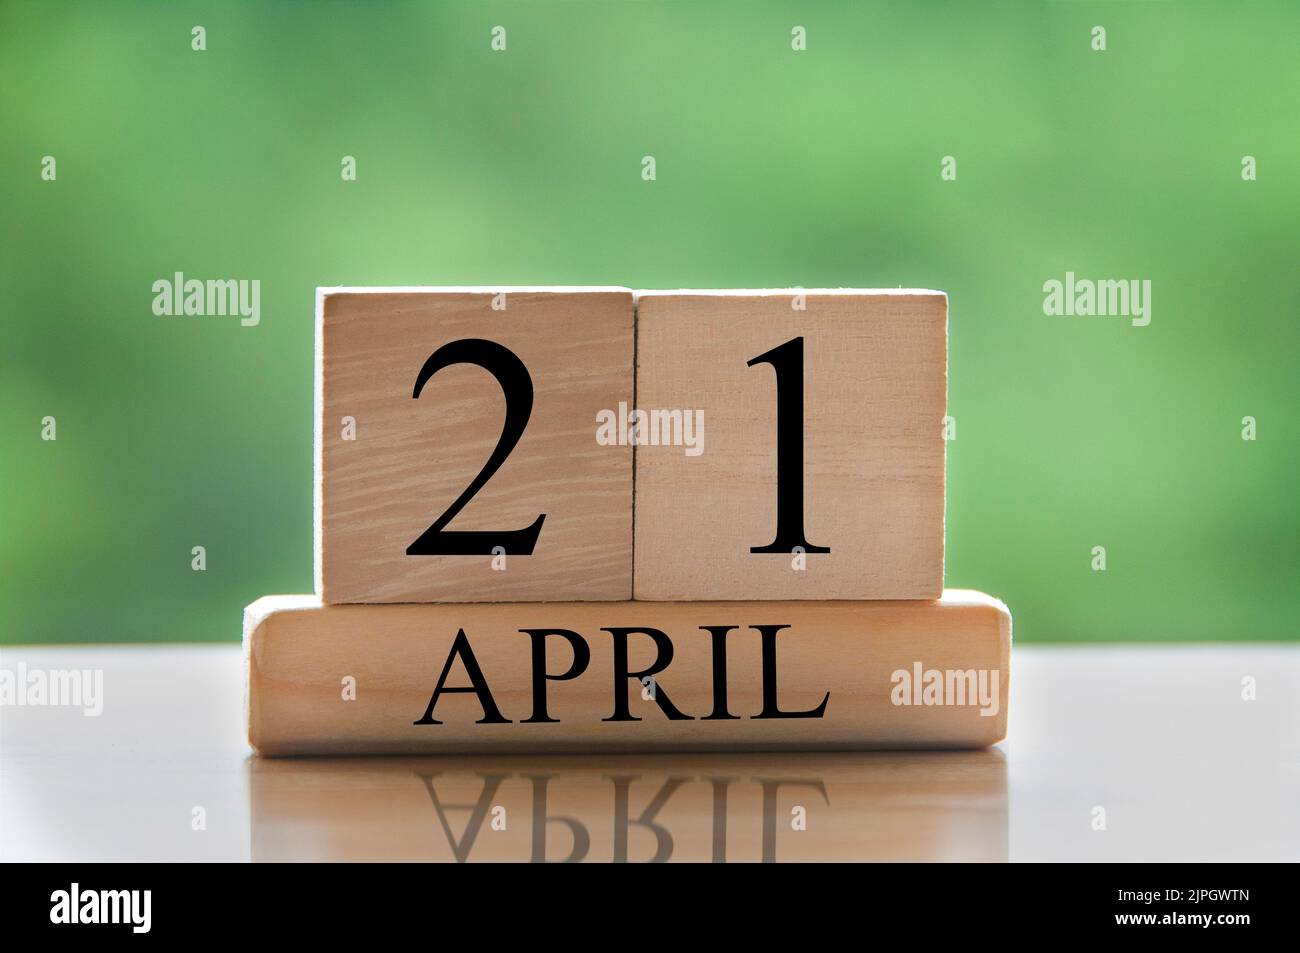 April 21 calendar date text on wooden blocks with blurred park